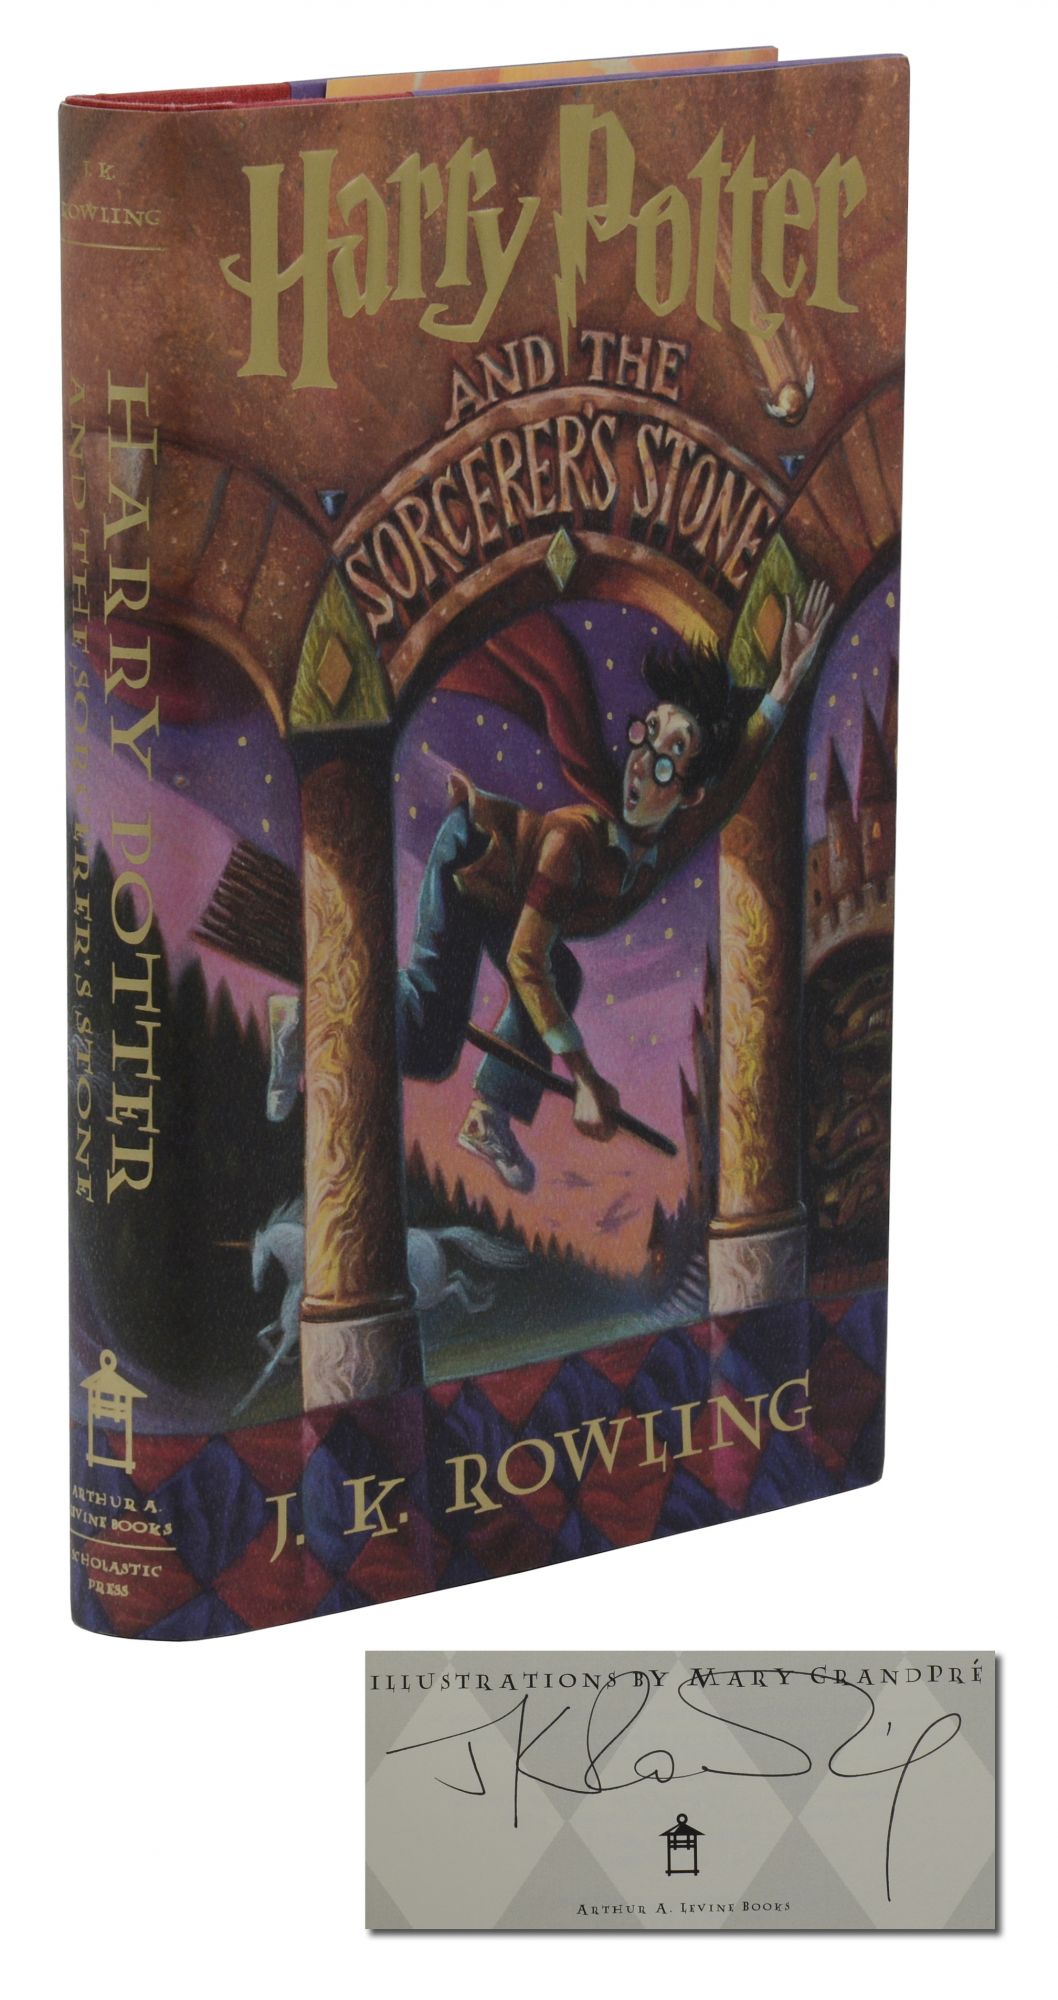 Harry Potter Tome 1 Harry Potter and the Philosopher's Stone - J.K. Rowling